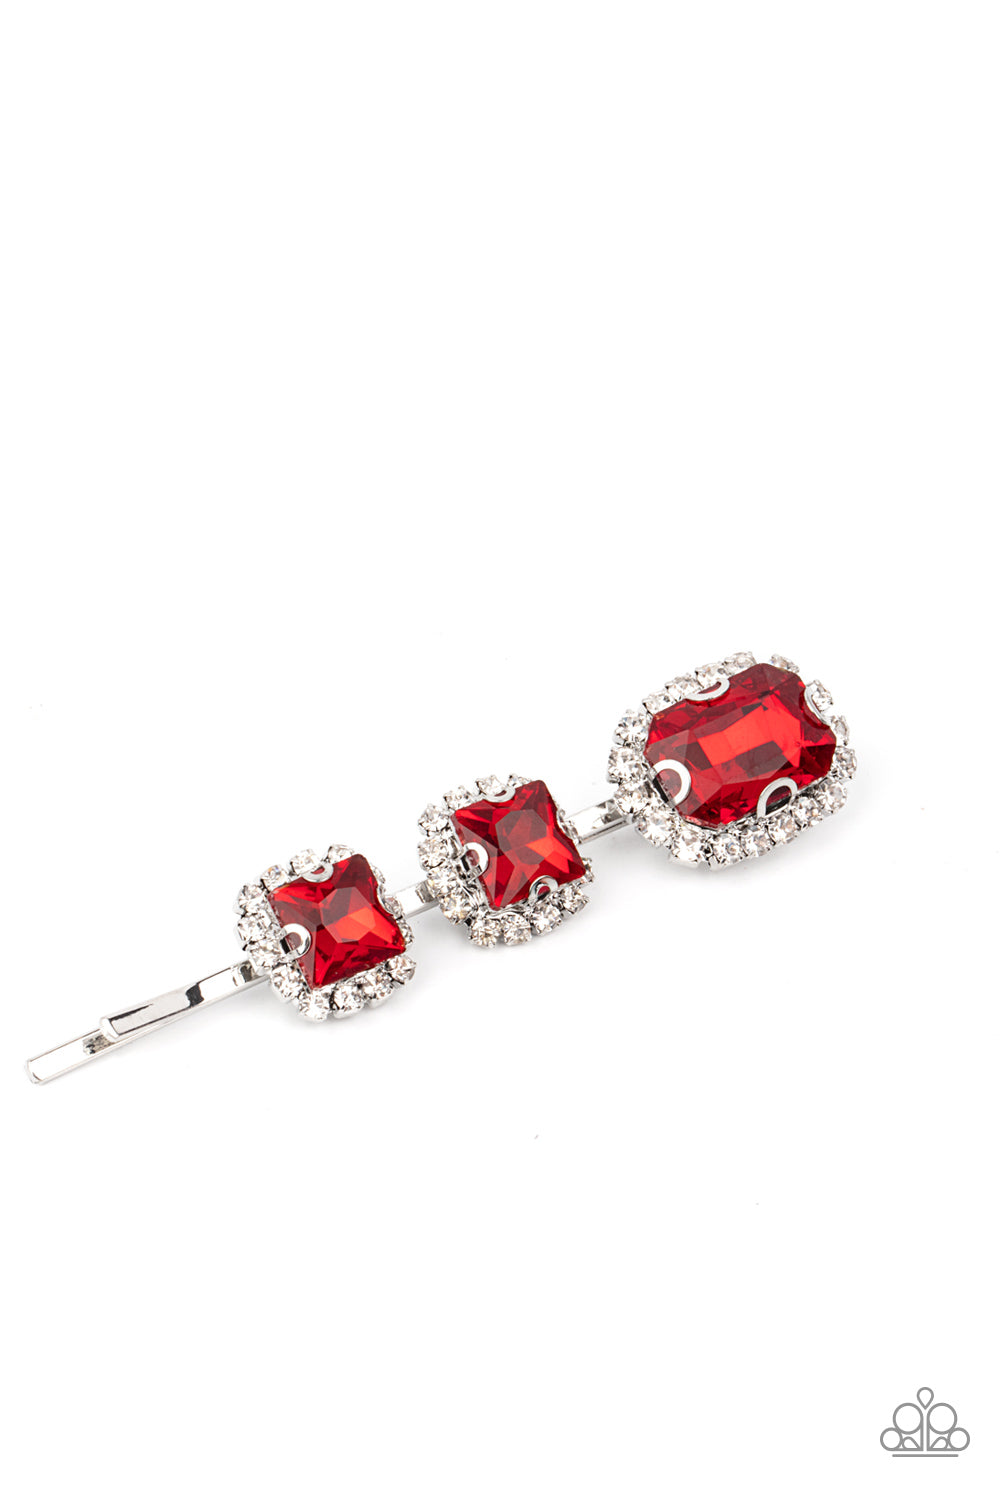 Teasable Twinkle - Red Hair Clip